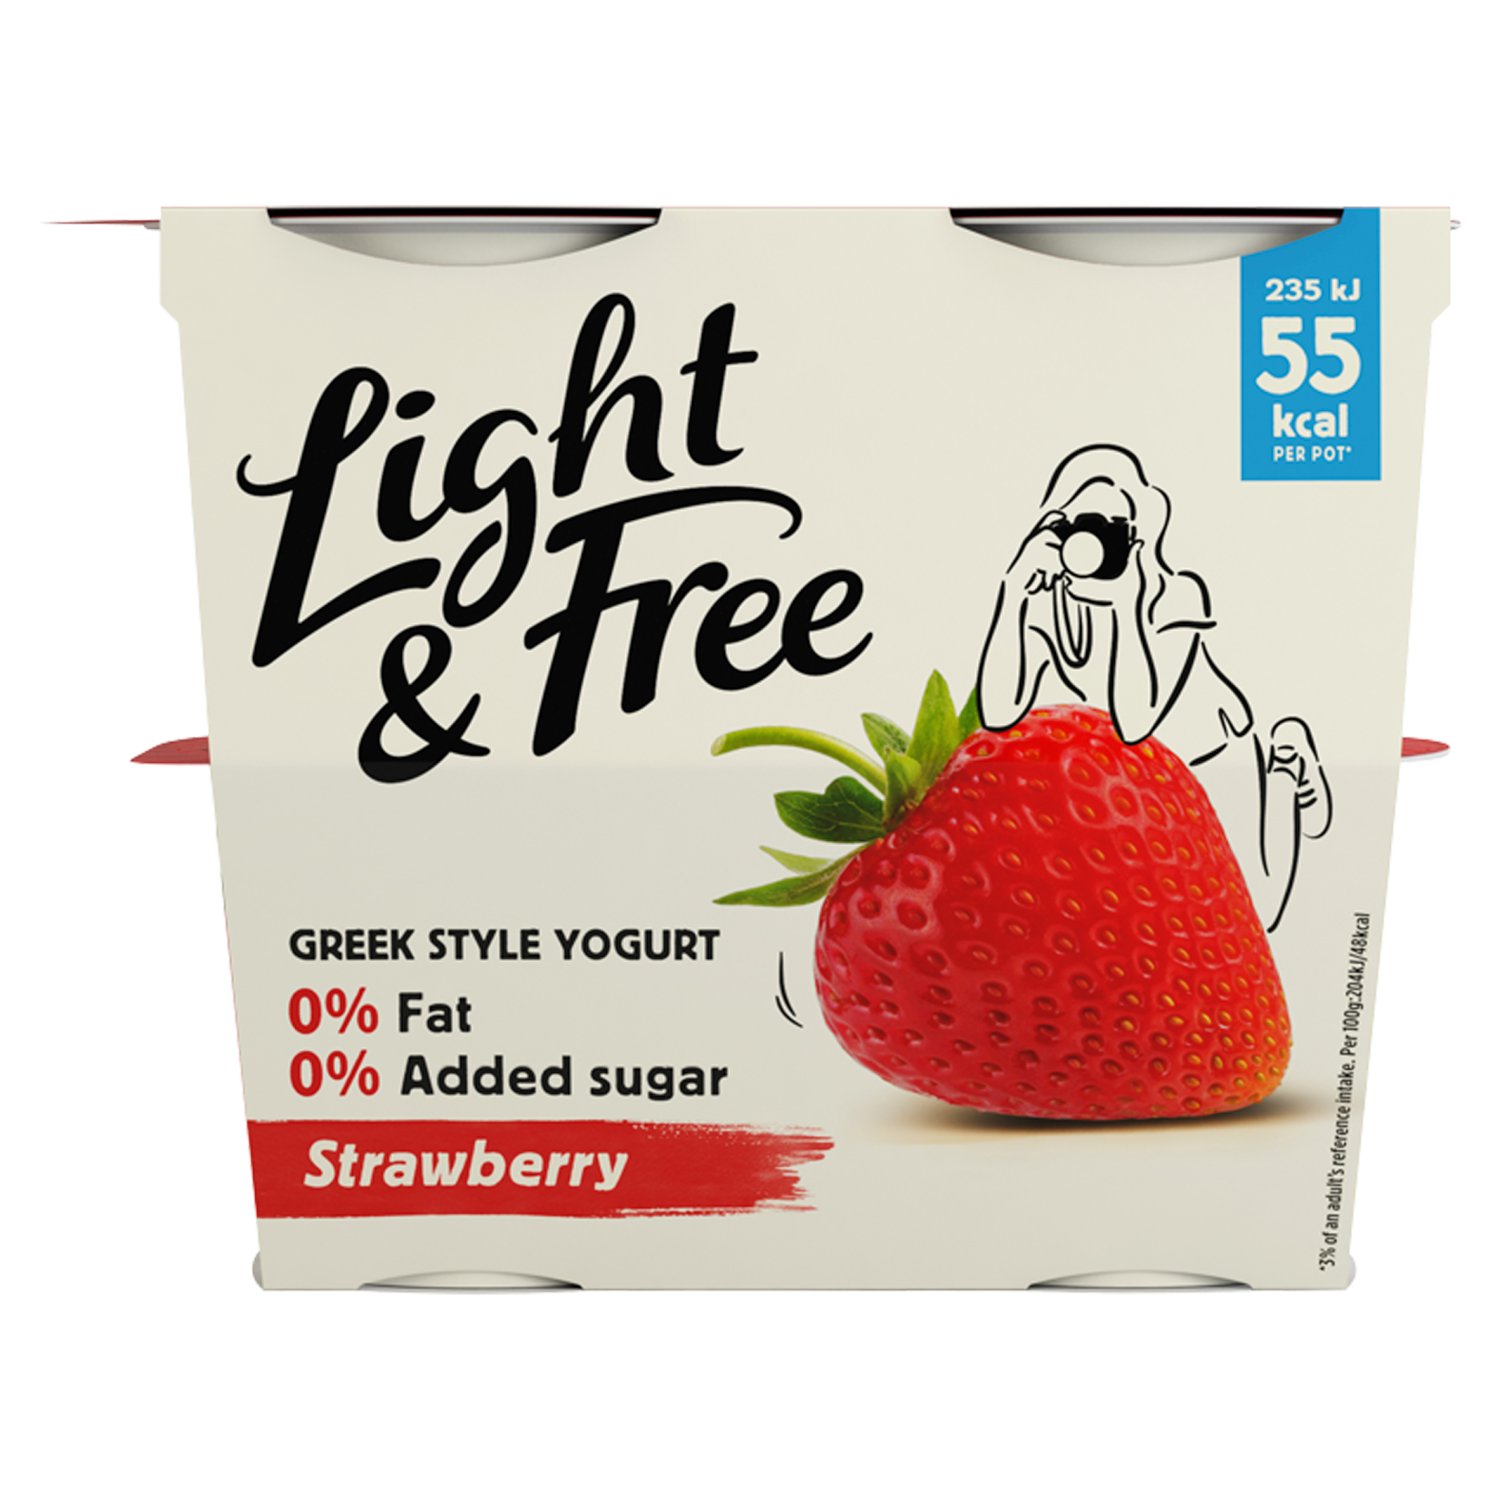 Light* & Free is thick, Greek-style yoghurt and it comes without compromise. Full of the good stuff: taste, texture and enjoyment! They’re 0% fat, 0% added sugar** but berry berry creamy. Add a dollop of our Greek-style yoghurt to brunch or breakfast or enjoy as a delicious snack.  Bursting with taste, texture and enjoyment, our yoghurts are light, free and never less.  

The majority of our fruit pots are recyclable - Check our website for recycling guidance as we work towards our 2025 goal to be 100% recyclable. Always read the label.  

*CONTAINS OVER 30% FEWER CALORIES THAN MOST FULL FAT FRUIT YOGURTS. 
**CONTAINS NATURALLY OCCURRING SUGARS ONLY
*** Please always check the label

Also, why not try our Skyr range!